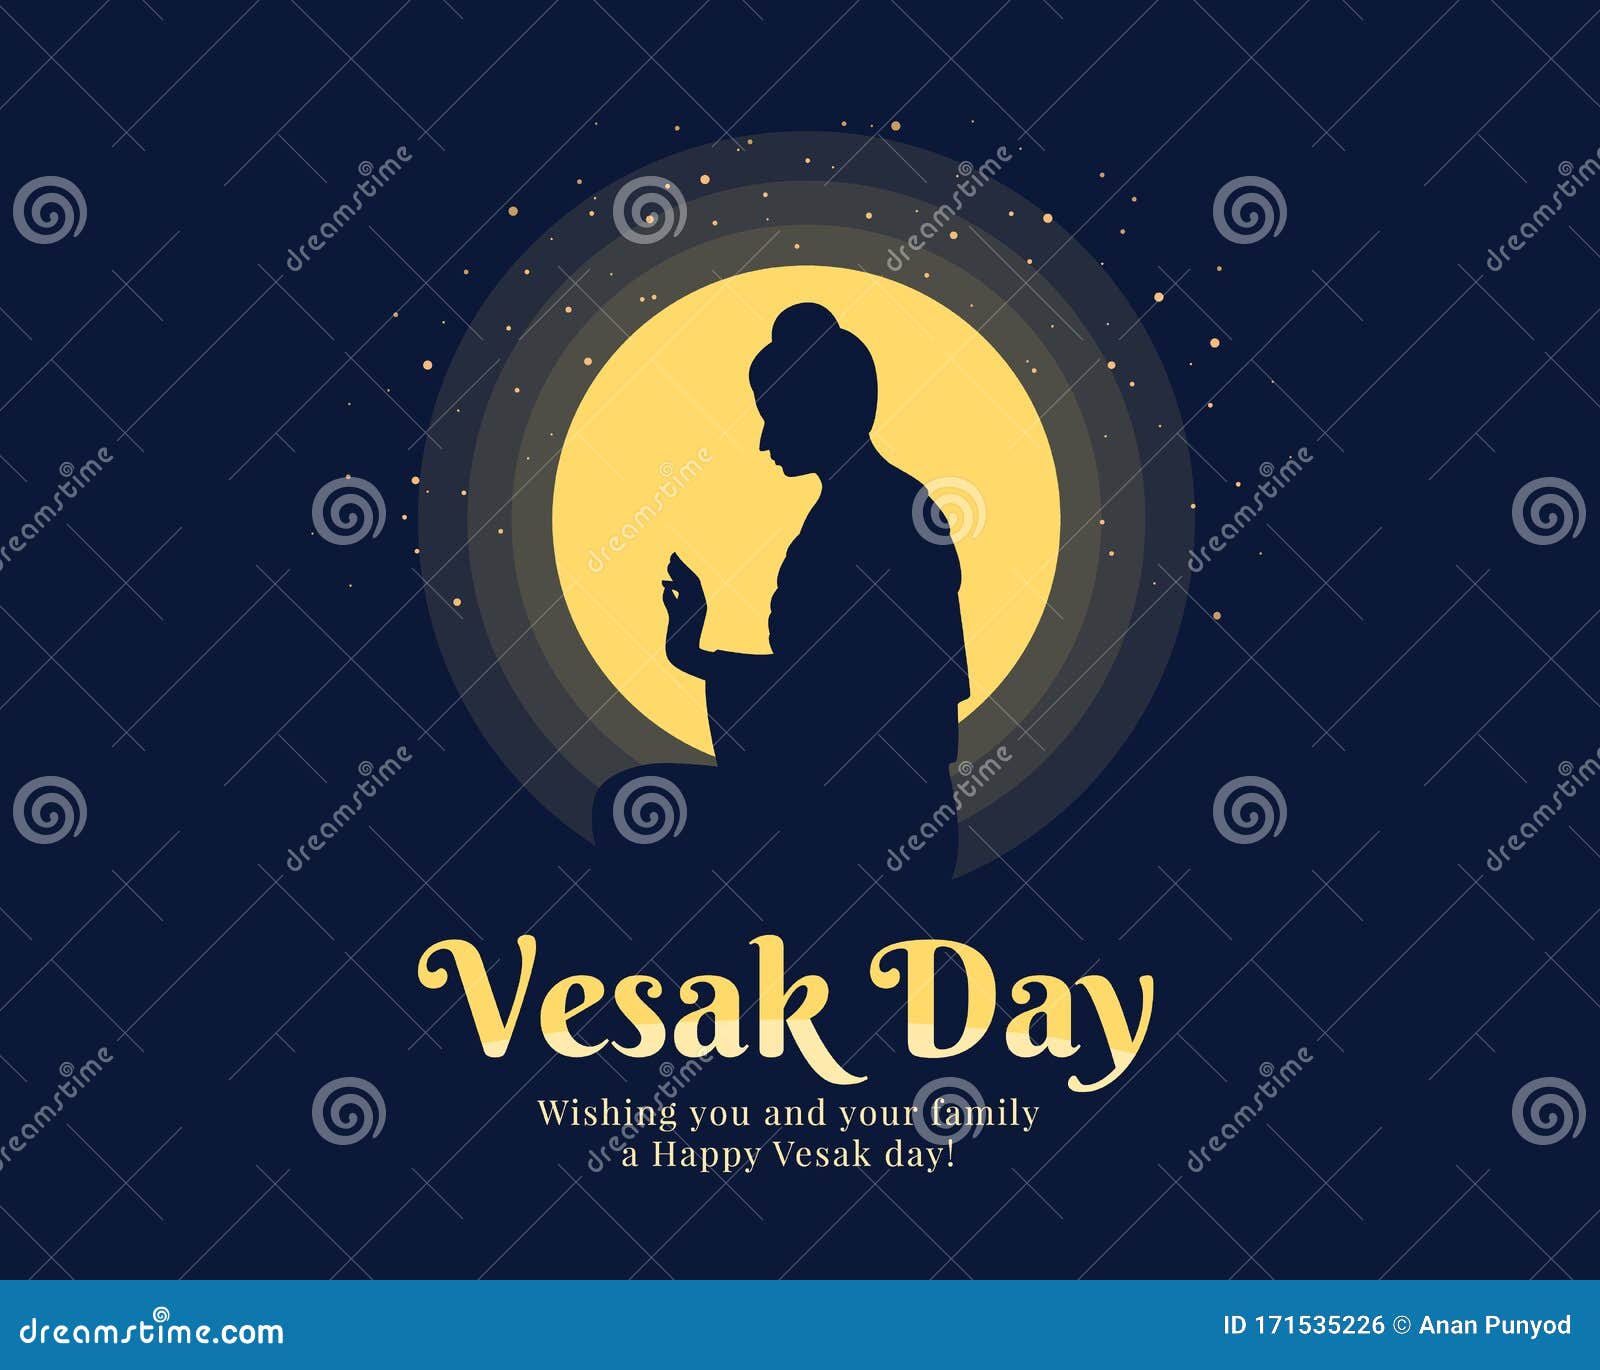 vesak day banner with the lord buddha raised his hands to preach on the full moon day